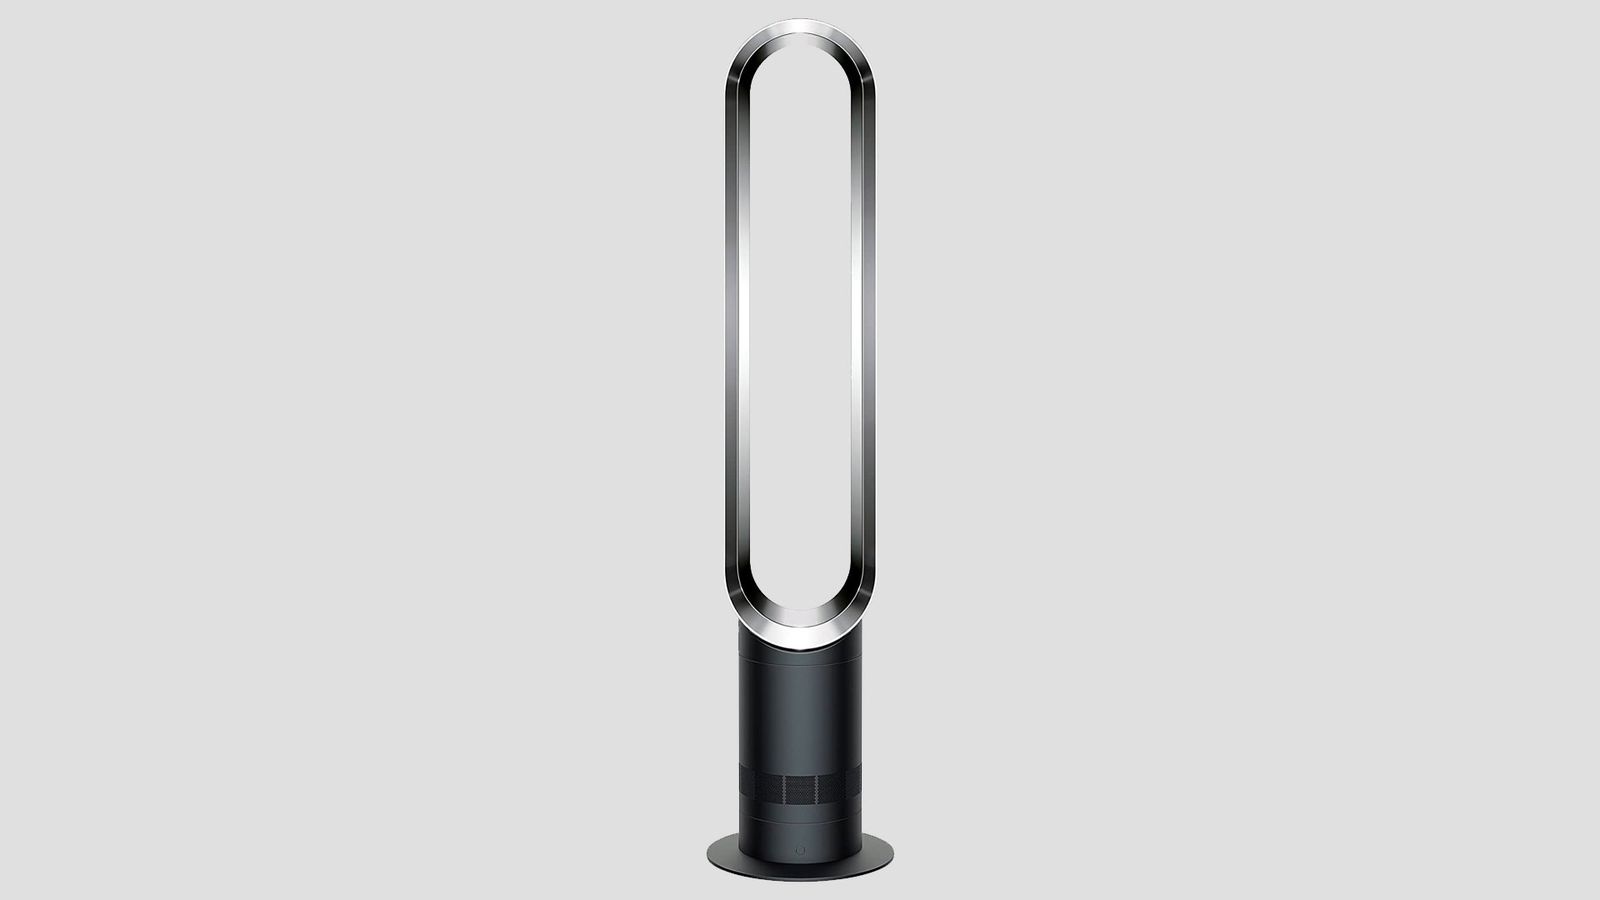 Dyson Cool AM07 product image of a black and silver tower fan.